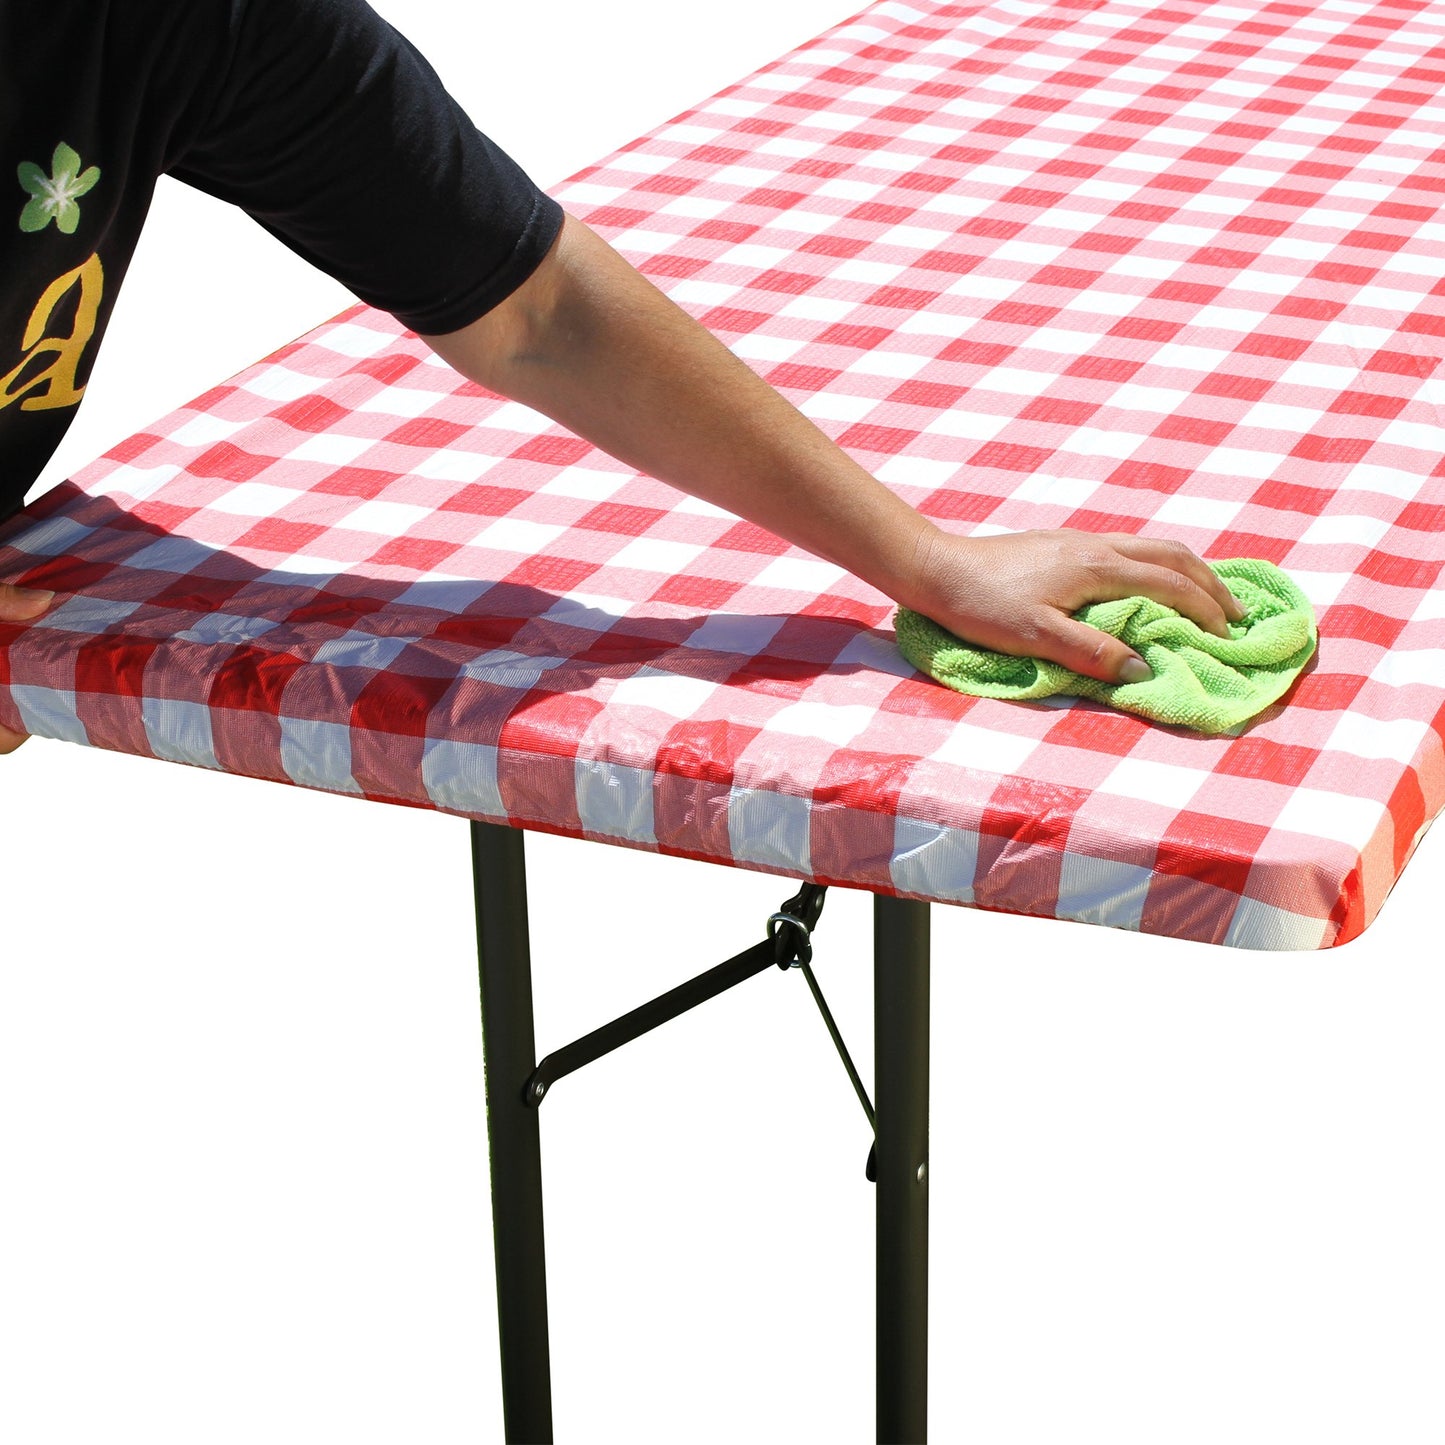 TableCloth PLUS 72" Checkerboard Red and White Fitted Polyester Tablecloth for 6' Folding Tables can be wiped clean with a cloth